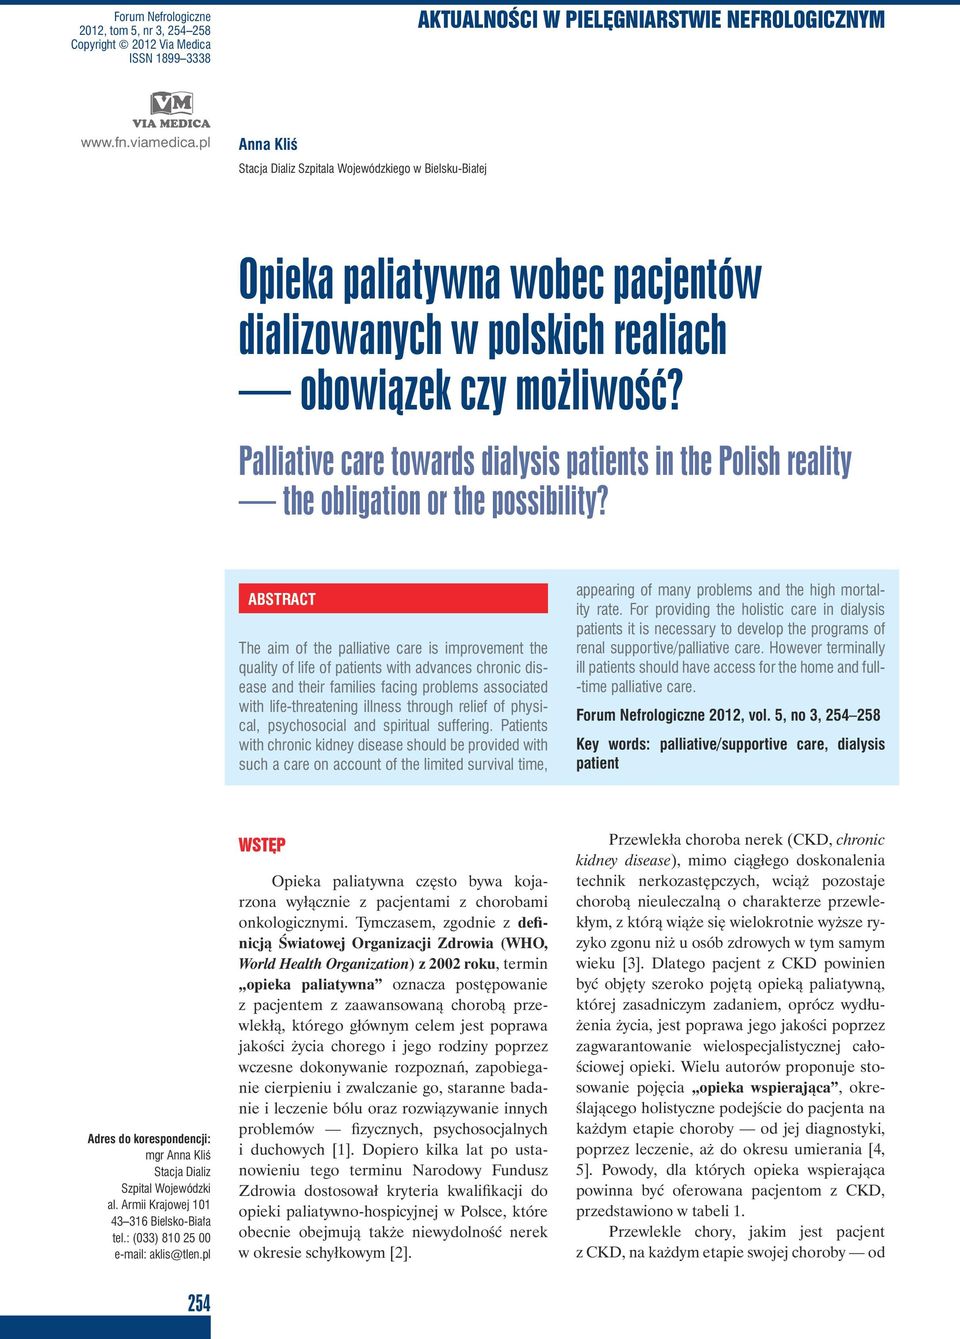 Palliative care towards dialysis patients in the Polish reality the obligation or the possibility?